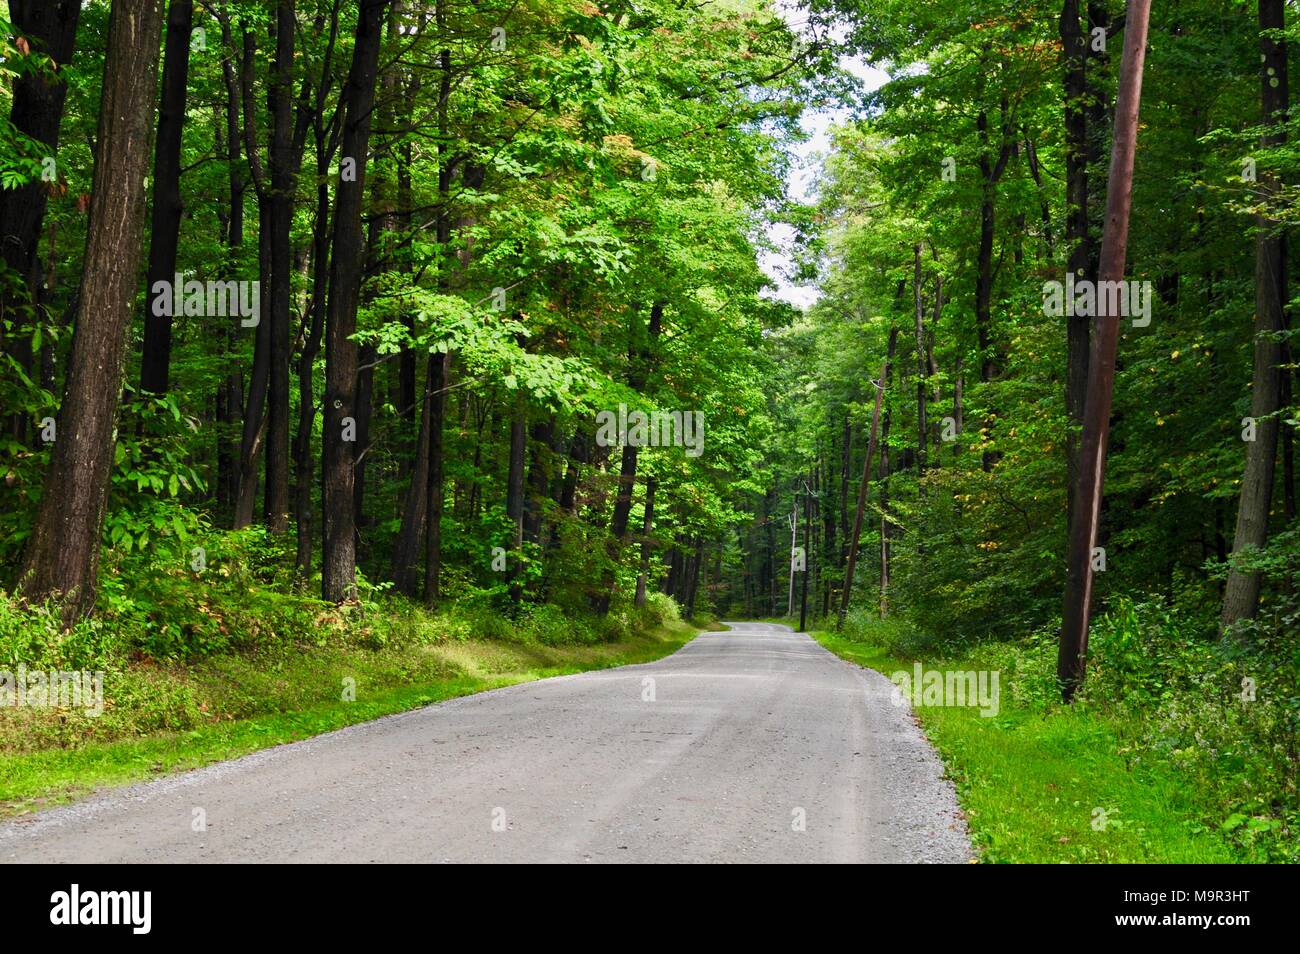 Seemingly endless rural road through a forest in summer. Stock Photo